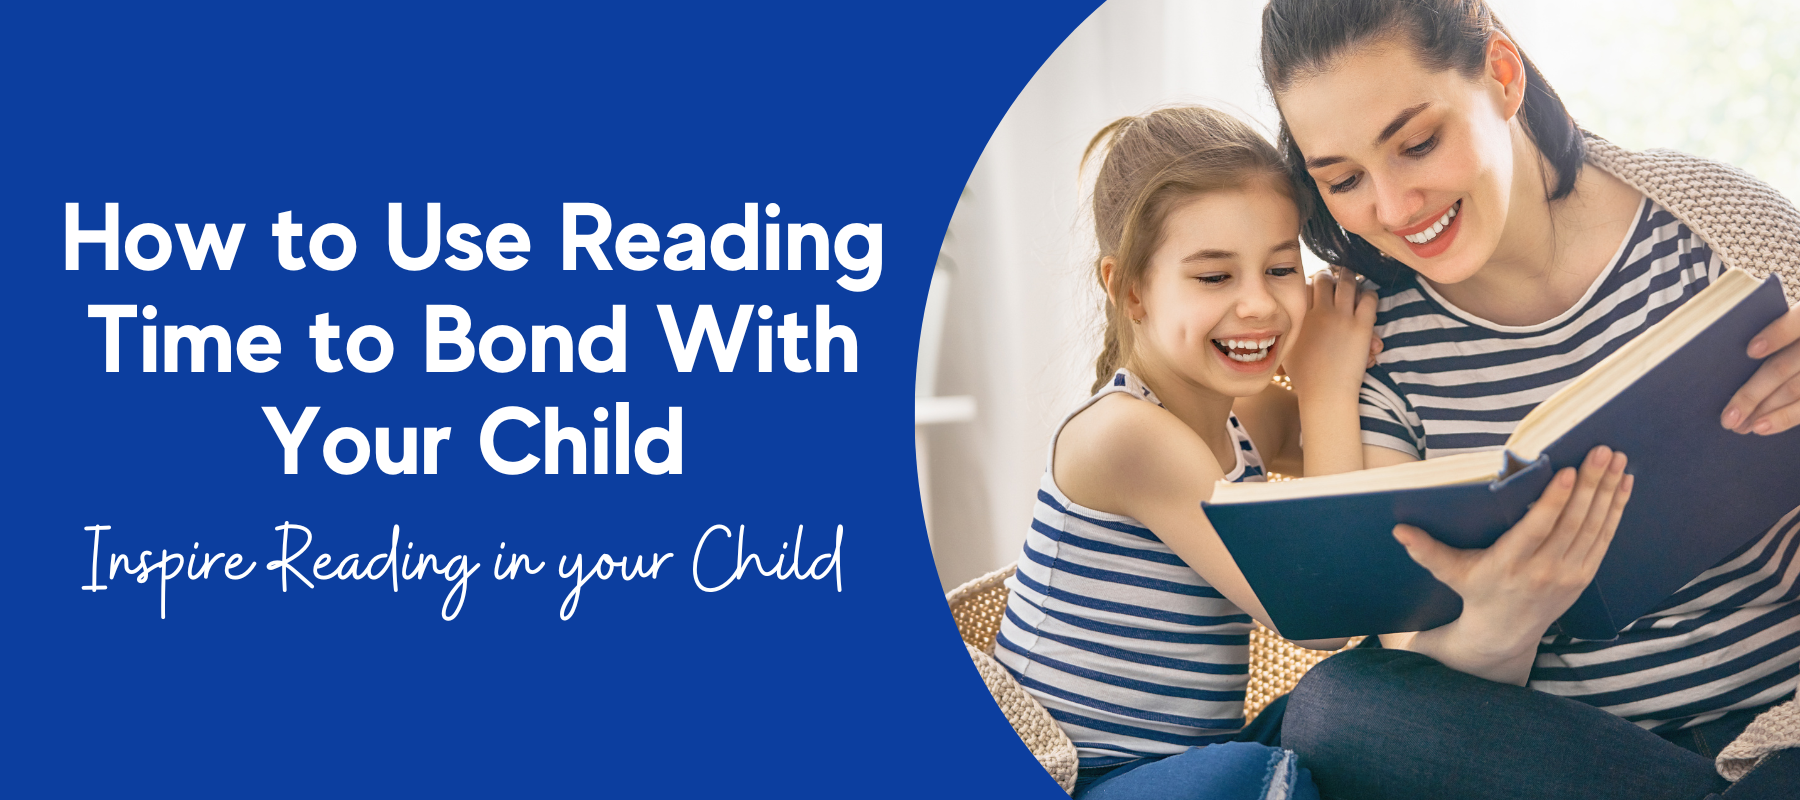 How to Use Reading Time to Bond With Your Child